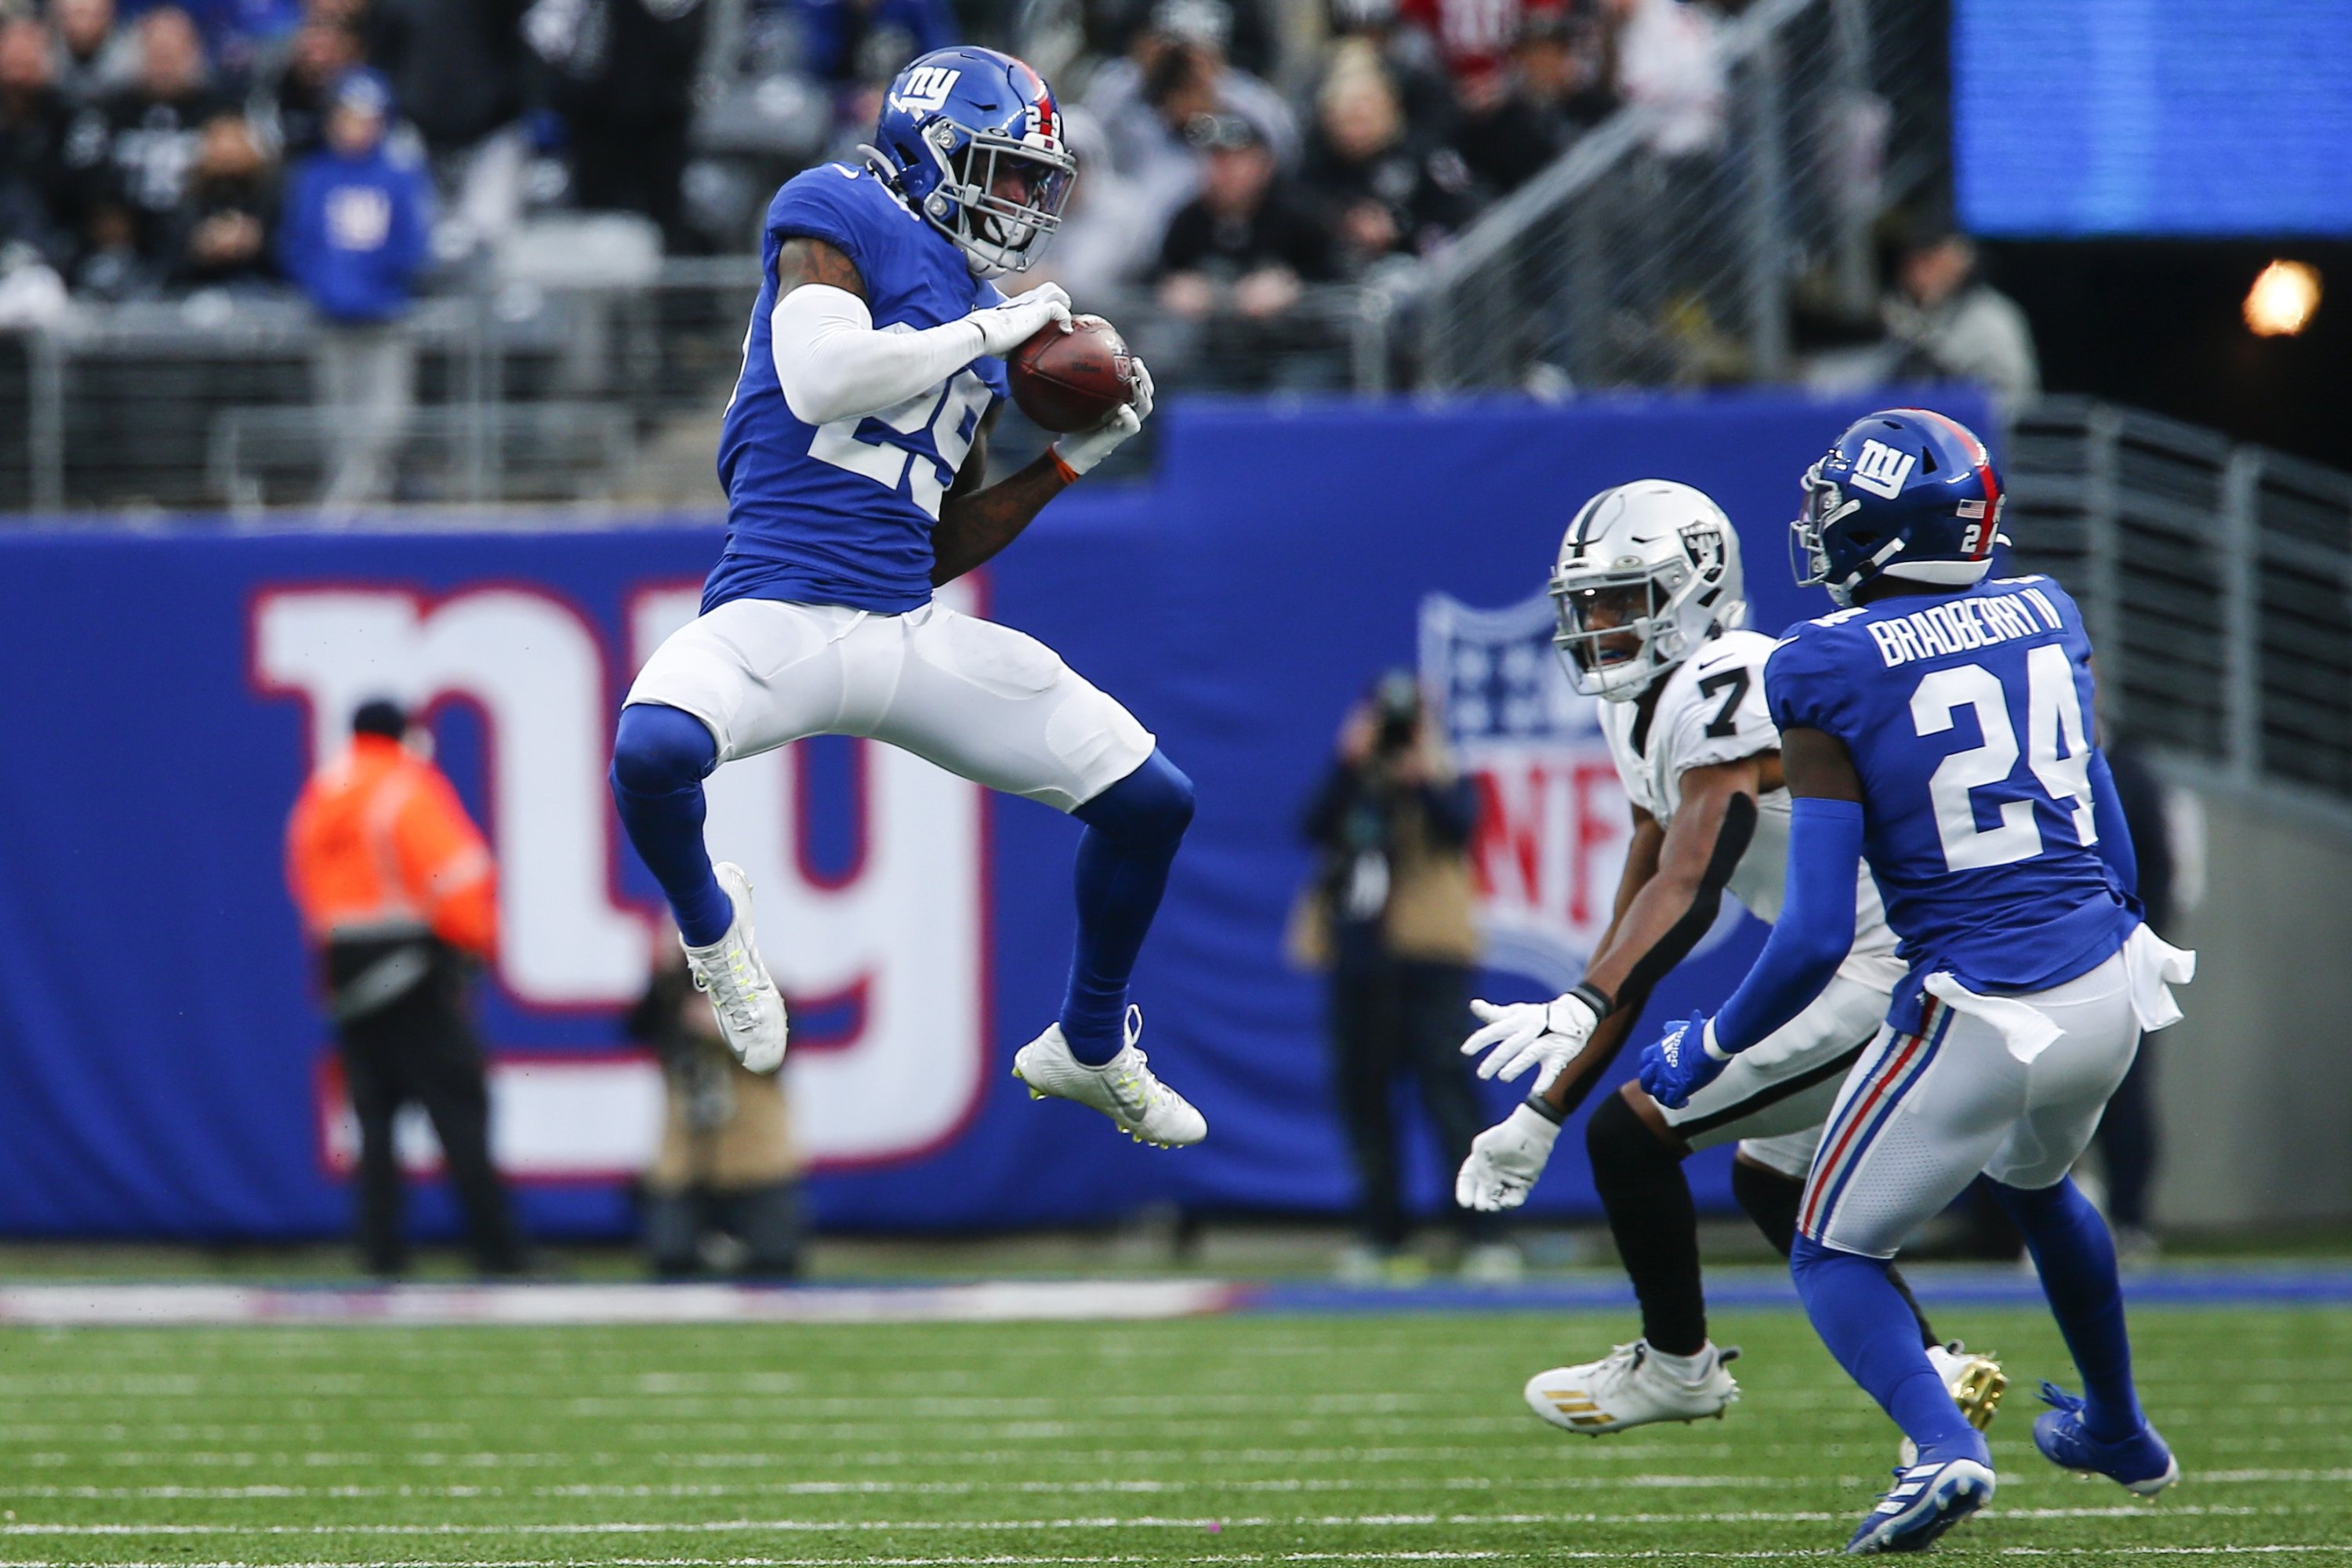 New York Giants free safety Xavier McKinney (29) intercepts a pass intended for Las Vegas Raiders' Zay Jones (7) as Giants' James Bradberry (24) watches during the second half of an NFL football game, East Rutherford, New Jersey, U.S., Nov. 7, 2021. (AP Photo)